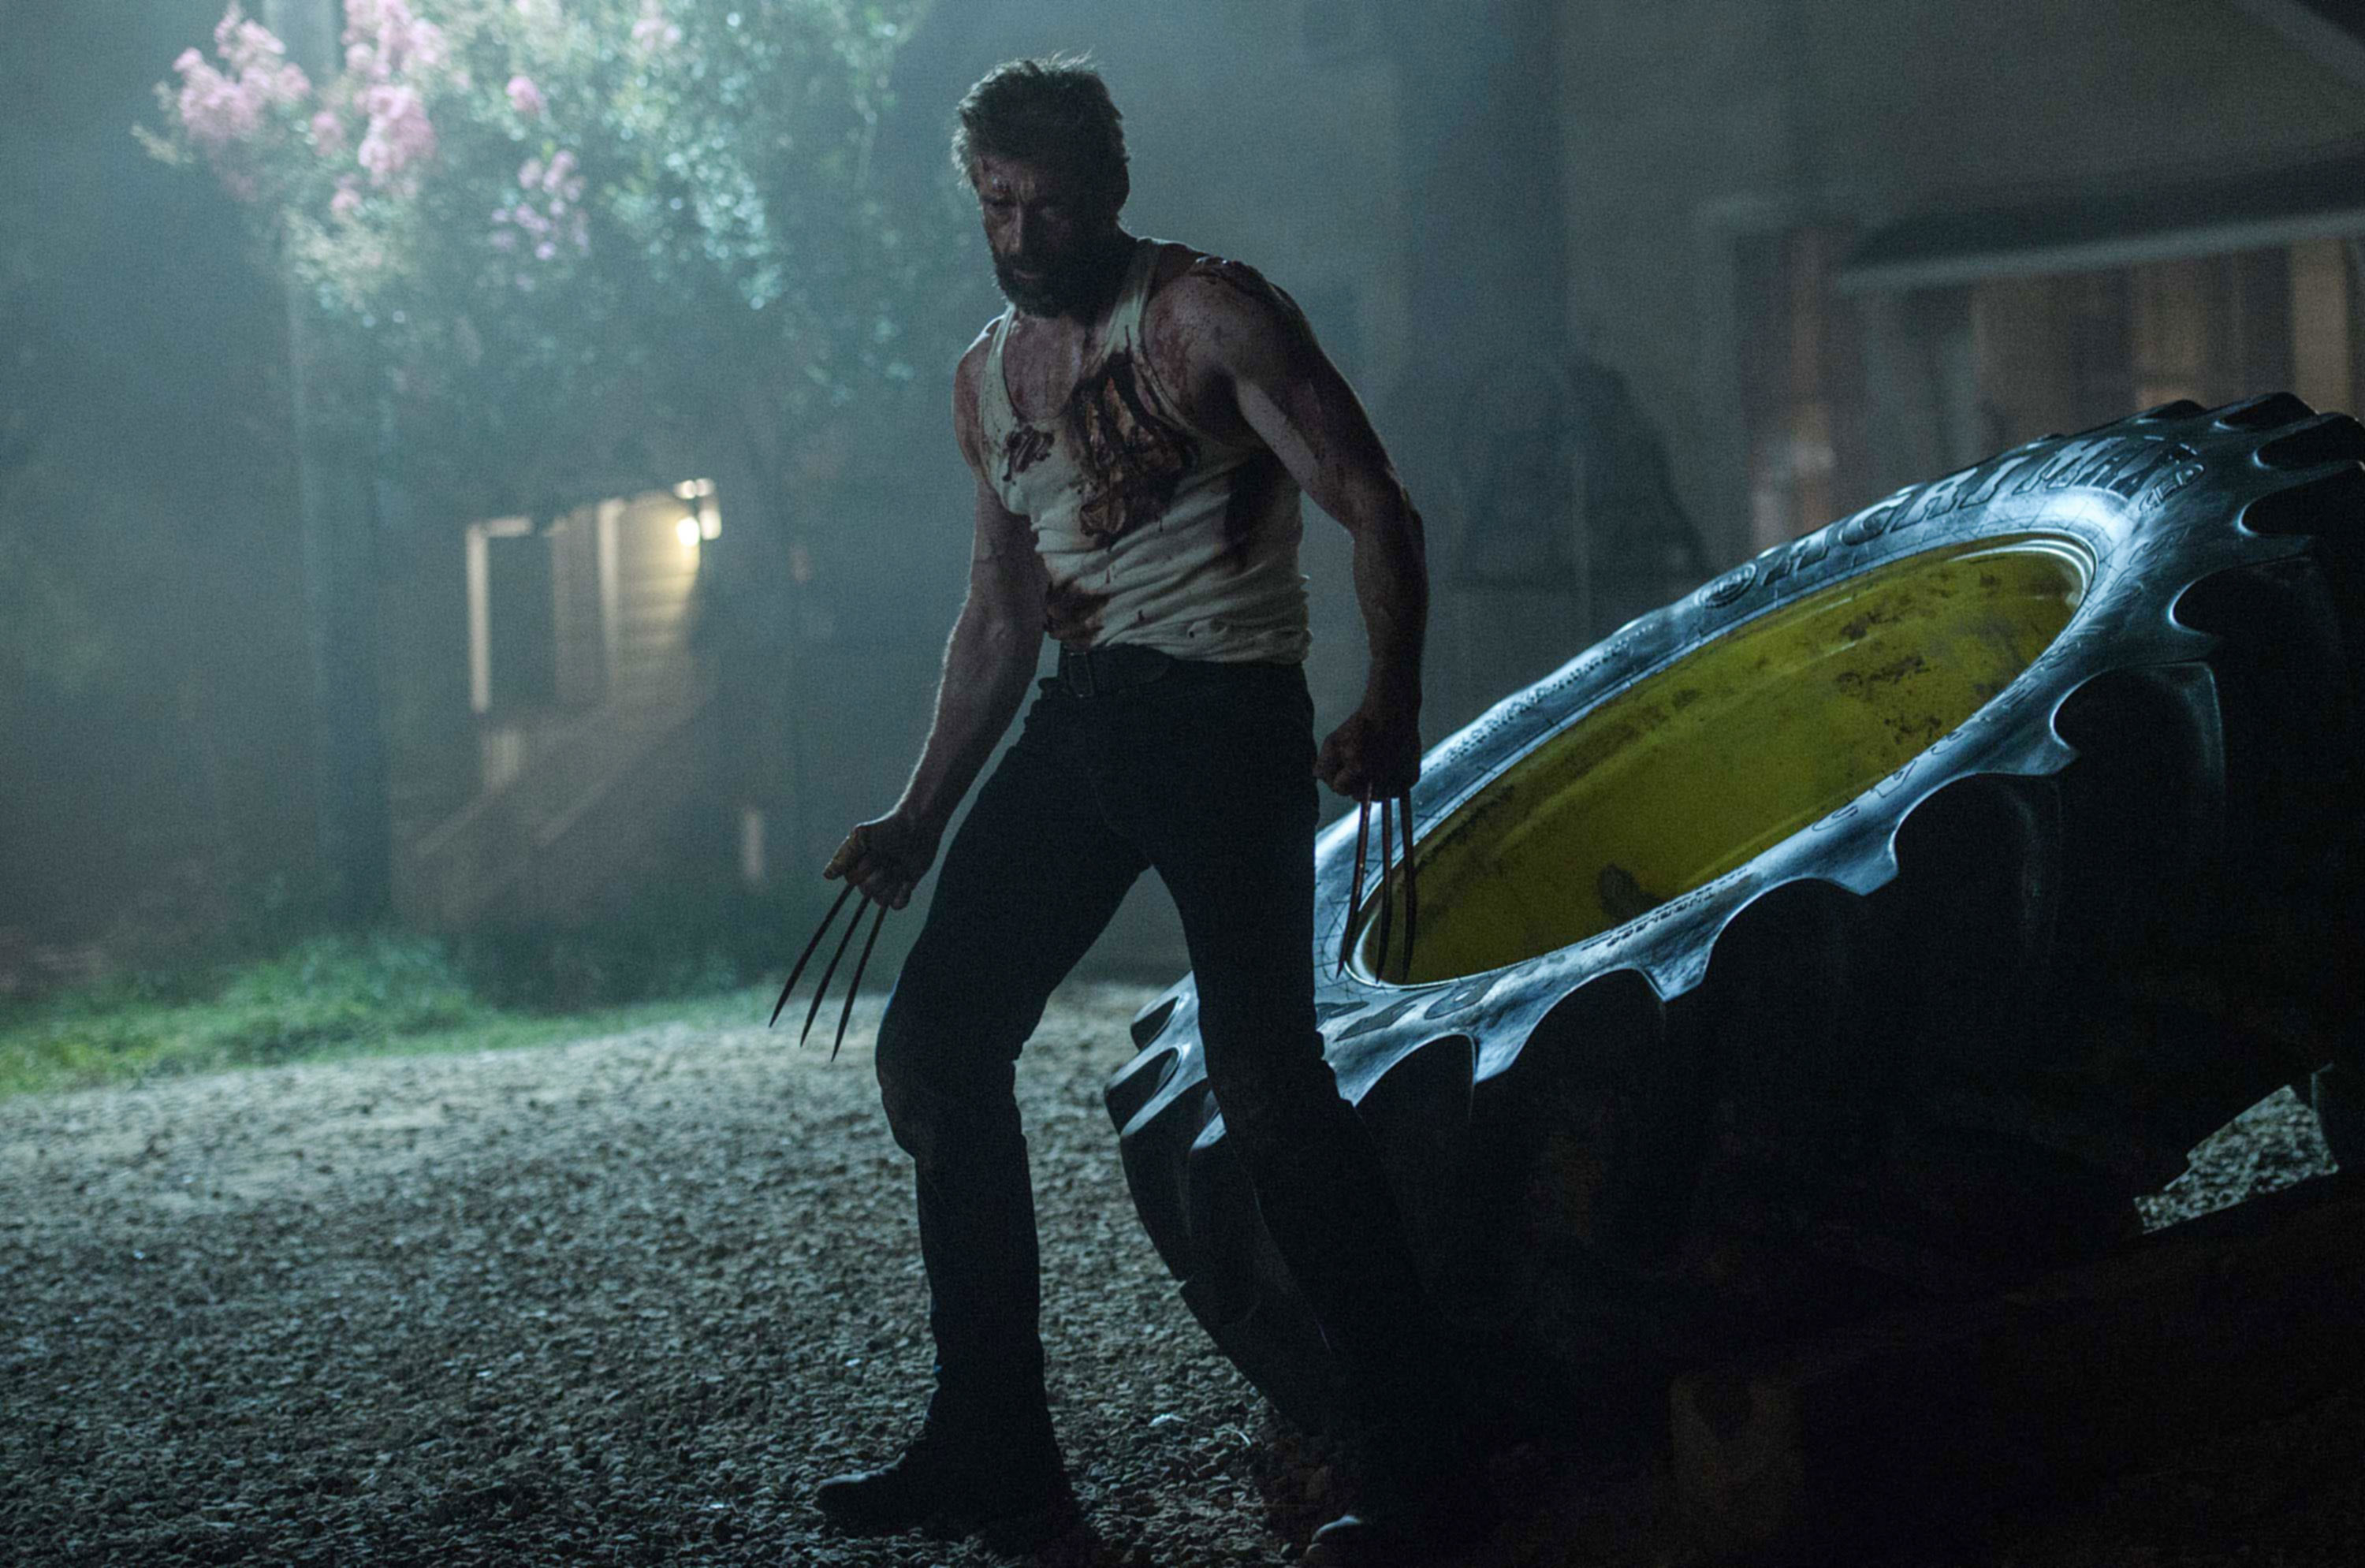 Wolverine with his claws out with blood on his shirt standing outside at night